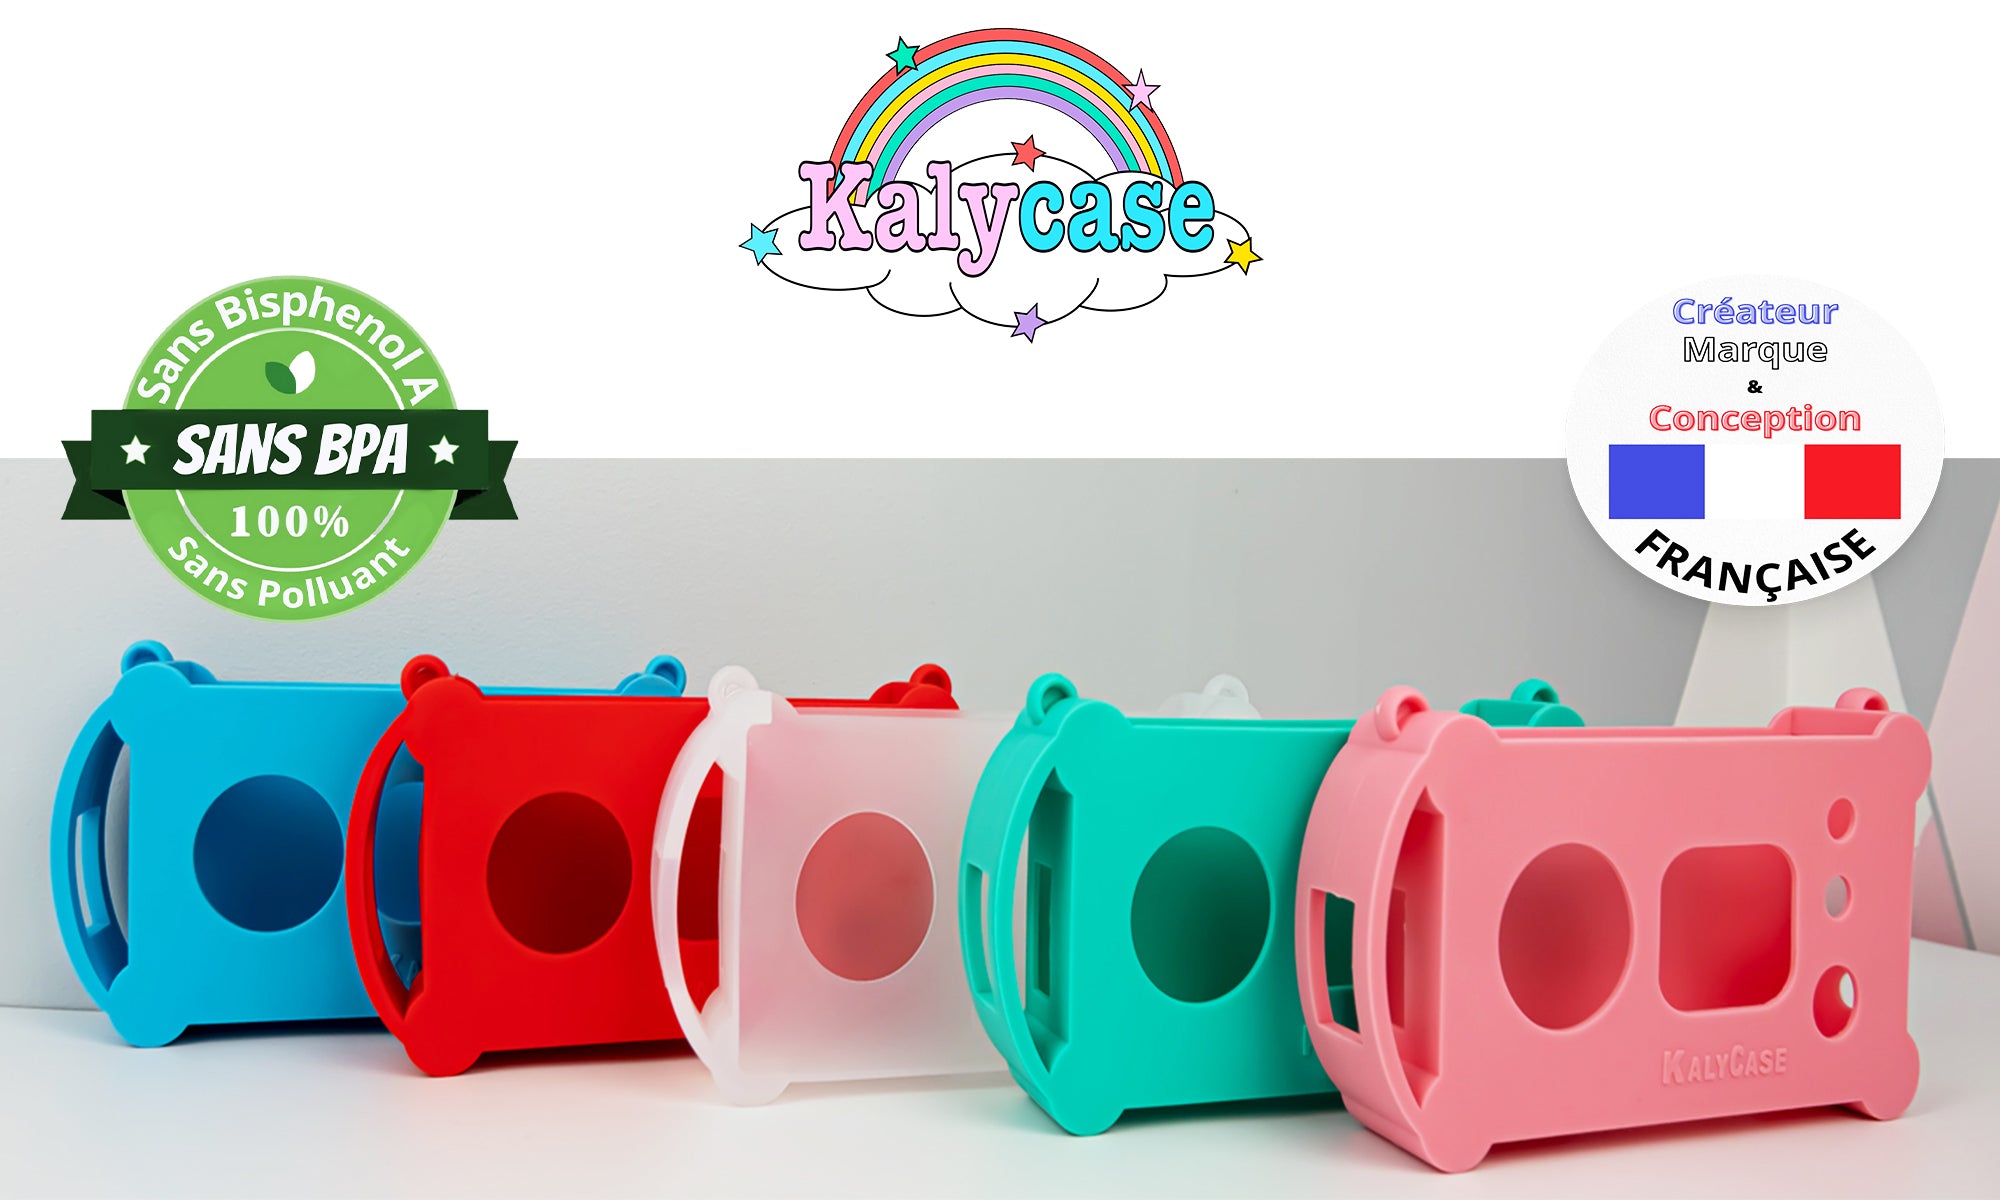  Silicone Protective Case for Lunii-MyFabulous Storyteller  Version 1, Bag for Lunii 1 : CDs & Vinyl